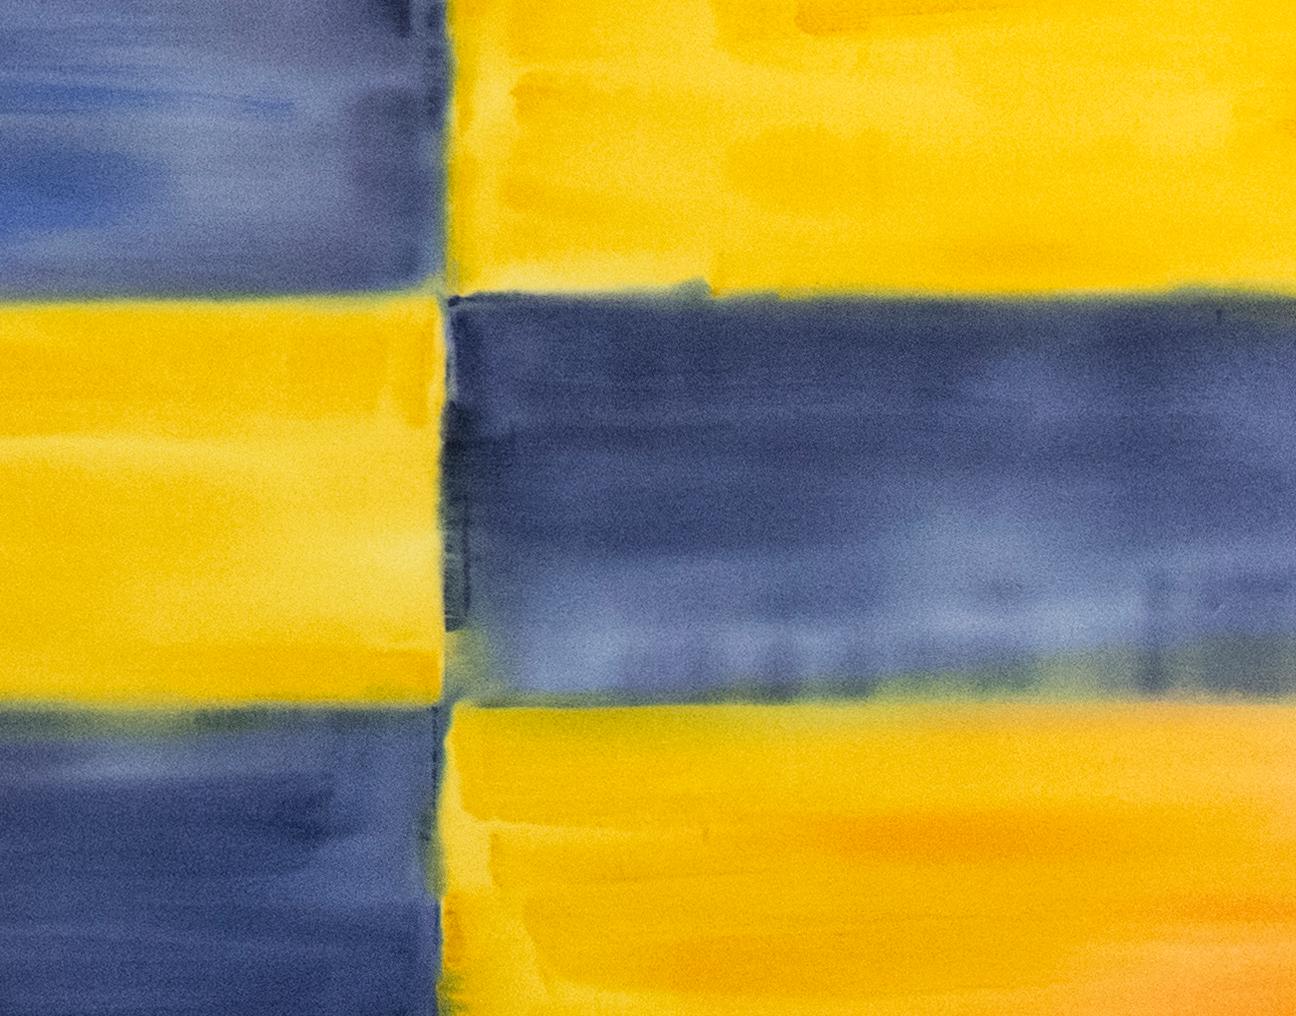 With this eye-catching abstract painting, Milly Ristvedt continues her sophisticated exploration of form and colour rendered in a classic grid pattern. Indigo blue, golden yellow and white rectangles of colour create an engaging checkerboard effect.